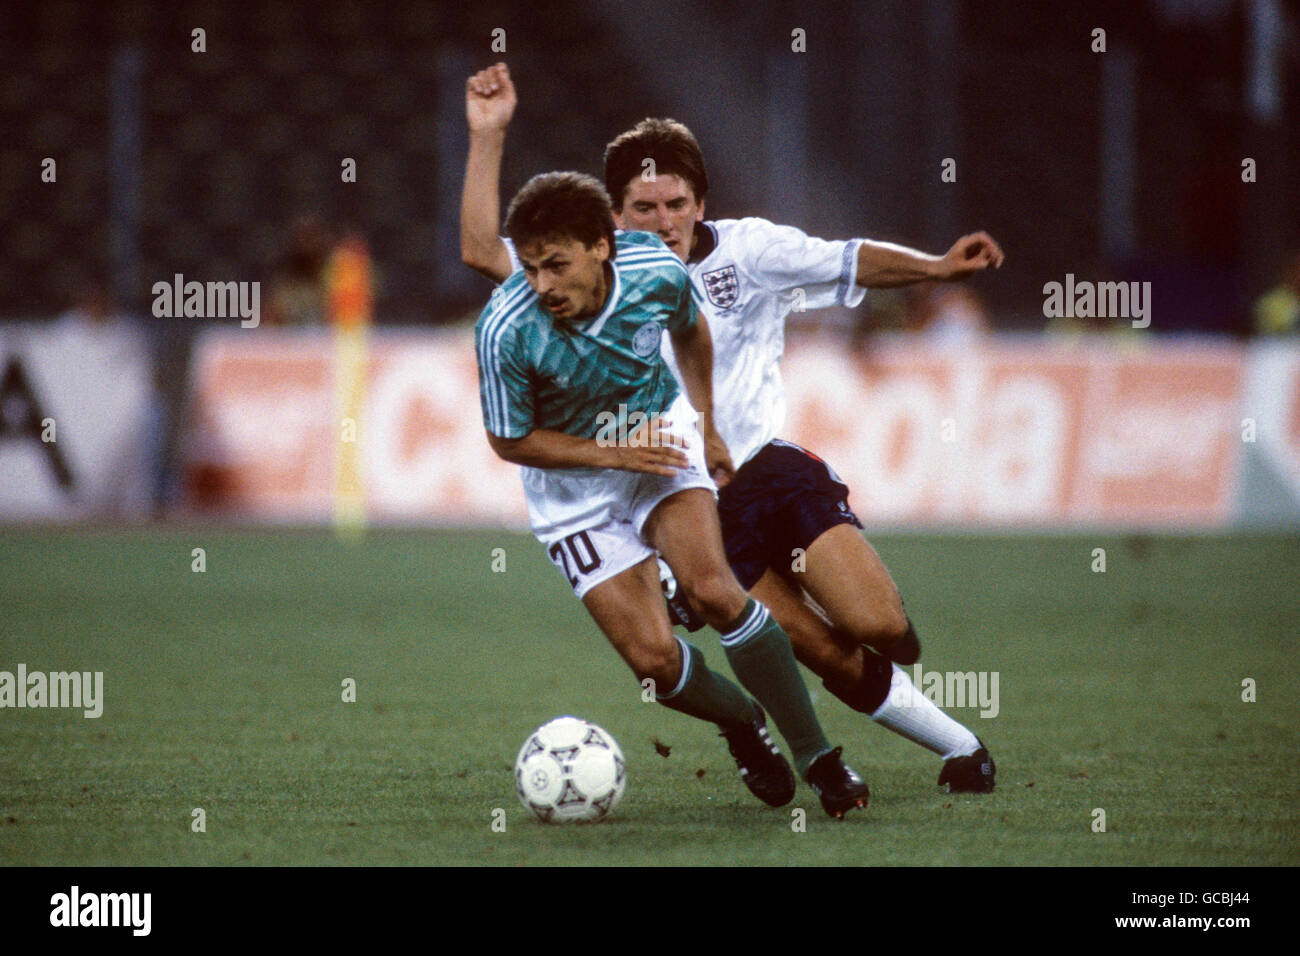 Soccer - World Cup Italia 1990 - Semi Final - West Germany v England - Stadio Delle Alpi. West Germany's Olaf Thon gets away from England's Peter Beardsley (r) Stock Photo